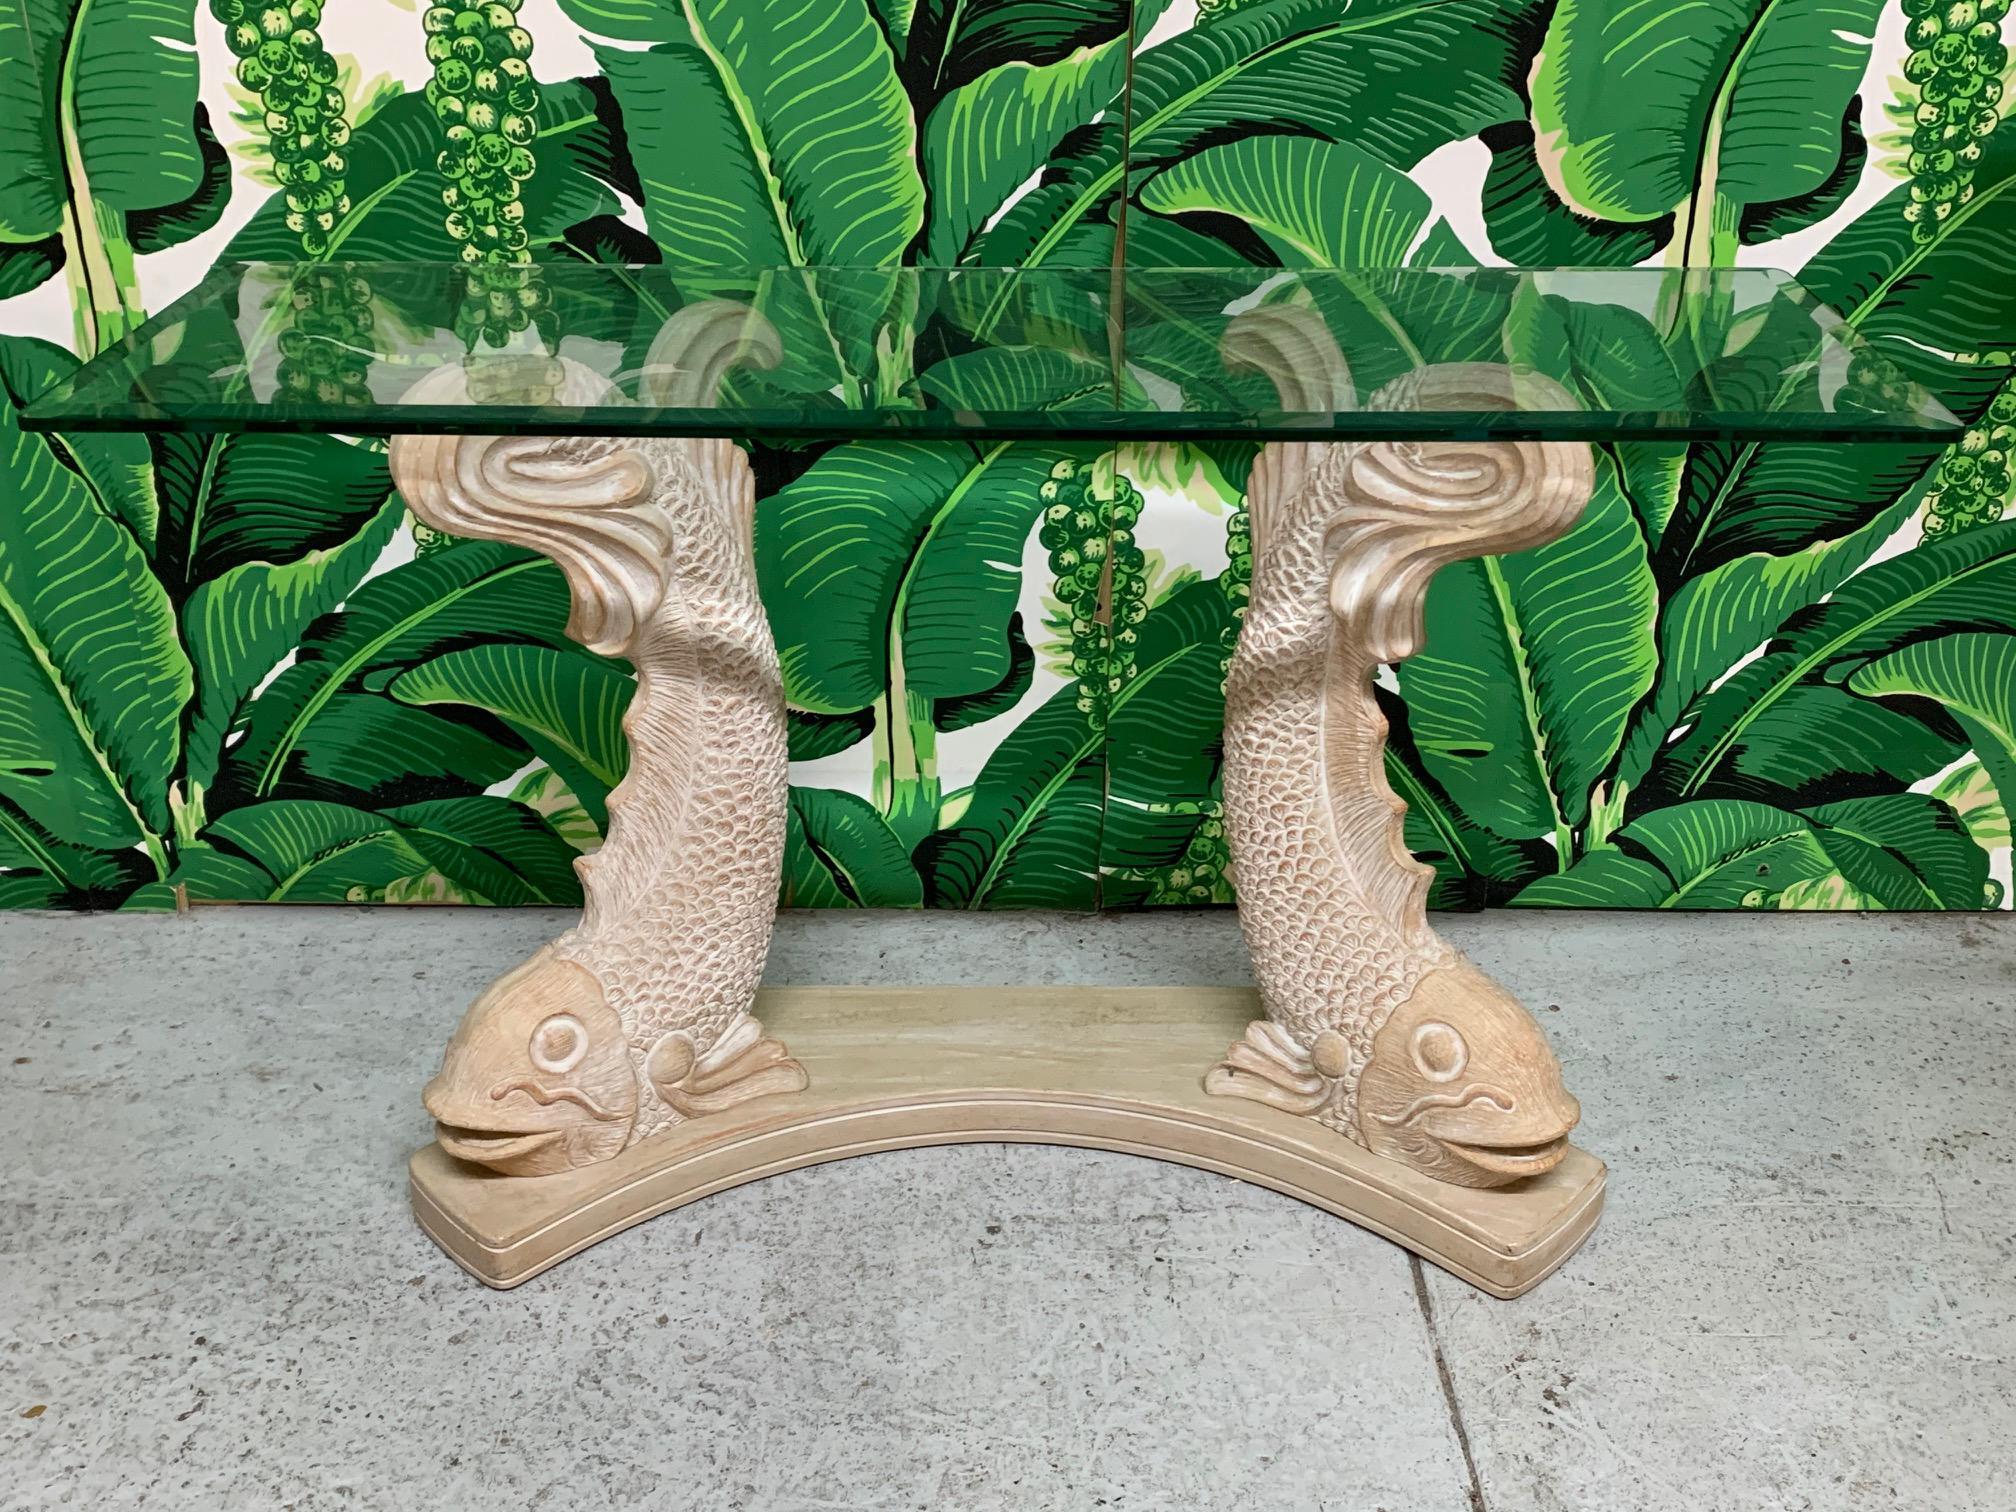 Sculptural console table in a Japanese Koi/Carp/Dolphin motif. Thick beveled glass top. Heavy plaster construction. Good condition with minor imperfections consistent with age, see photos for condition details.
For a shipping quote to your exact zip